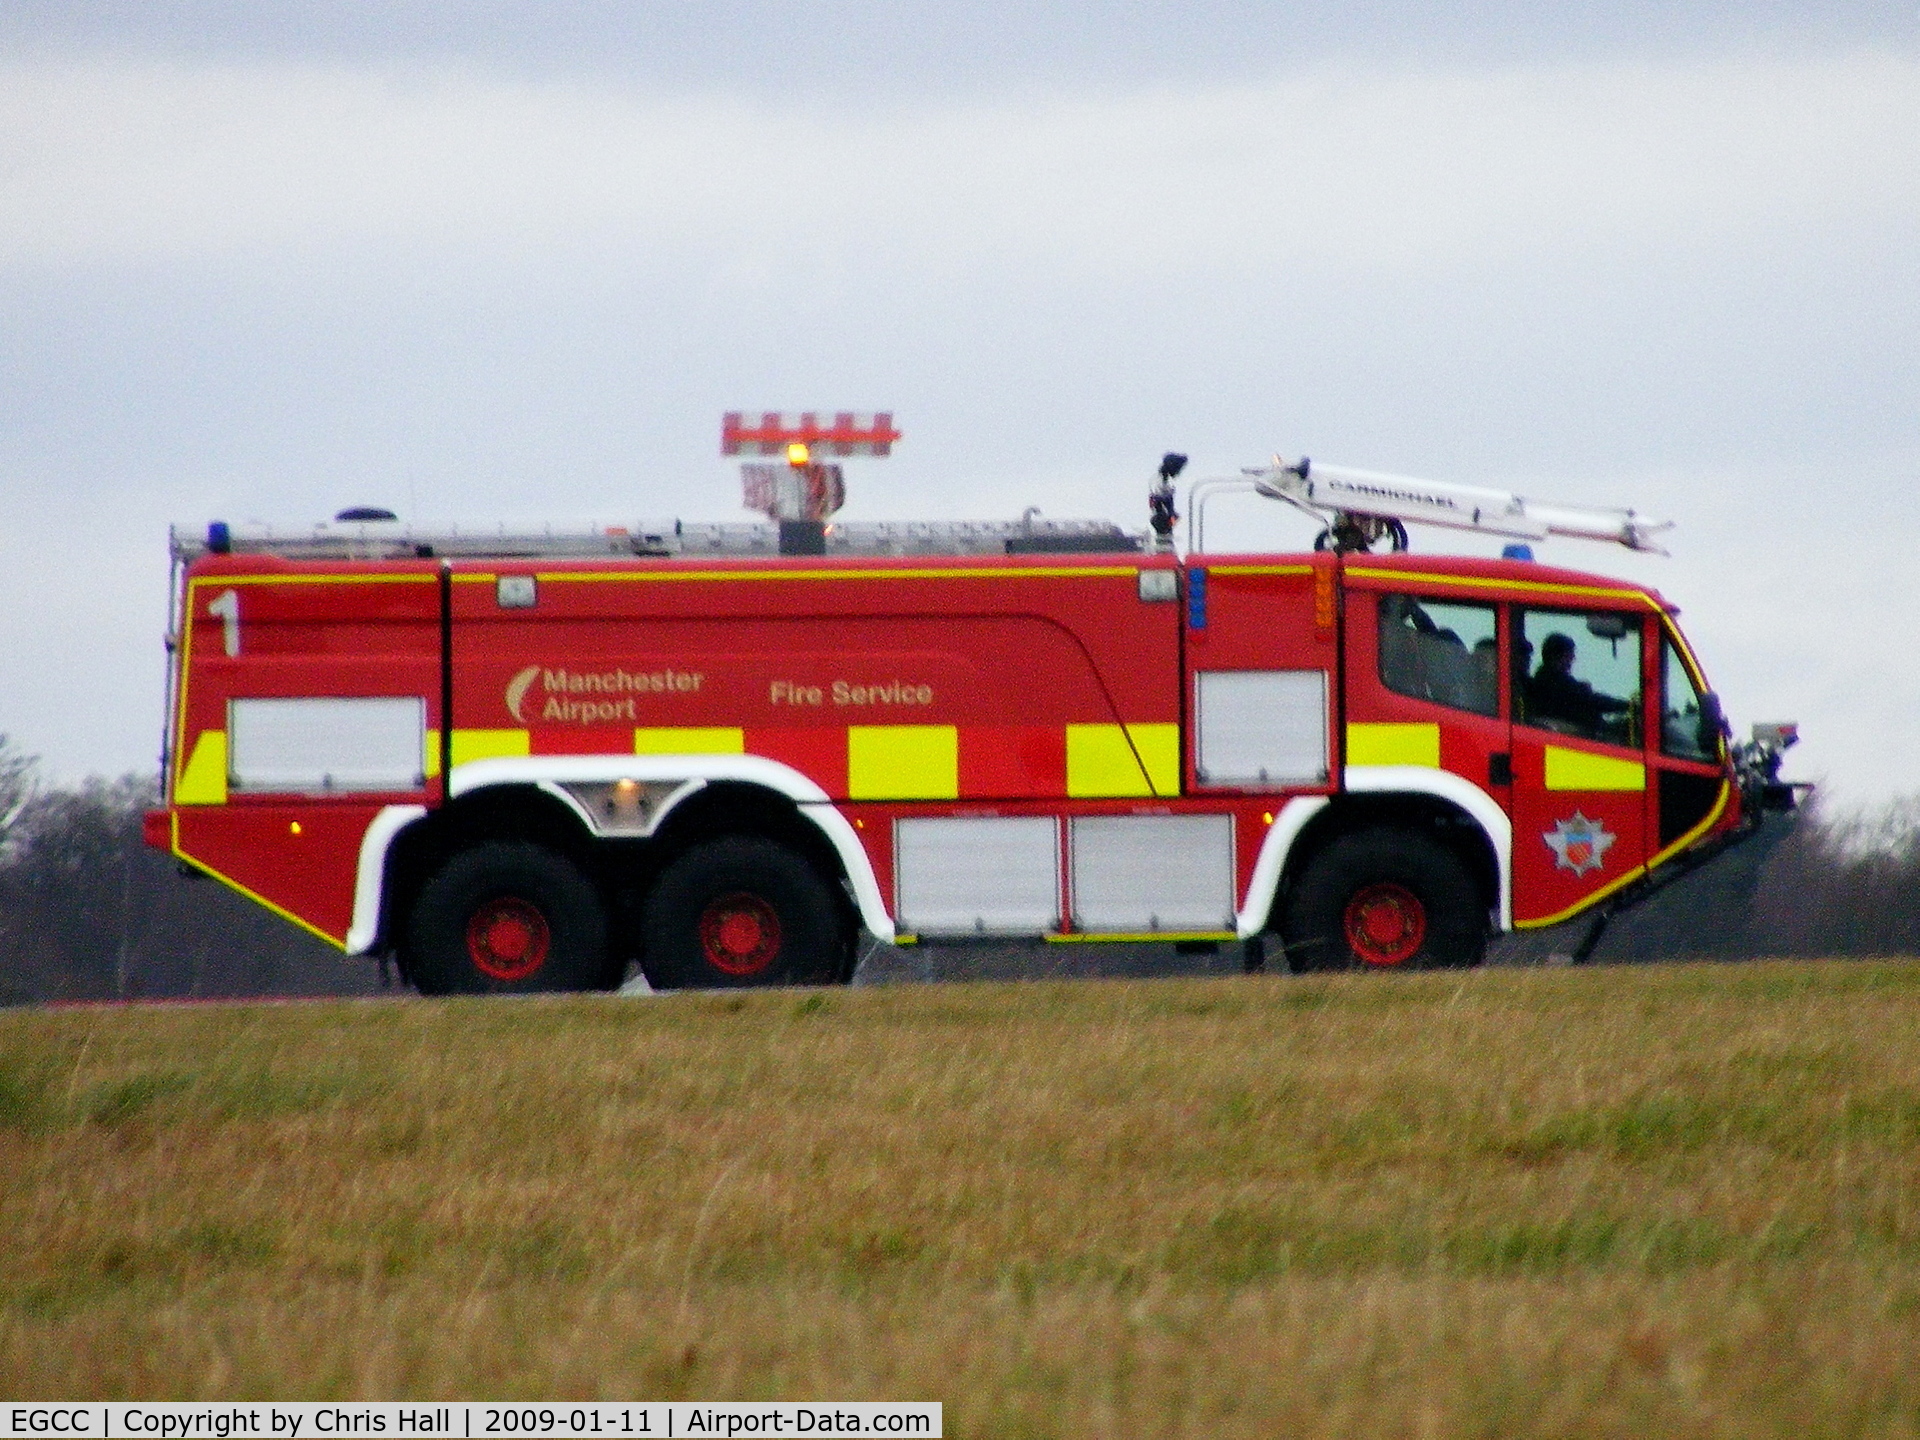 Manchester Airport, Manchester, England United Kingdom (EGCC) - Fire truck at Manchester Airport